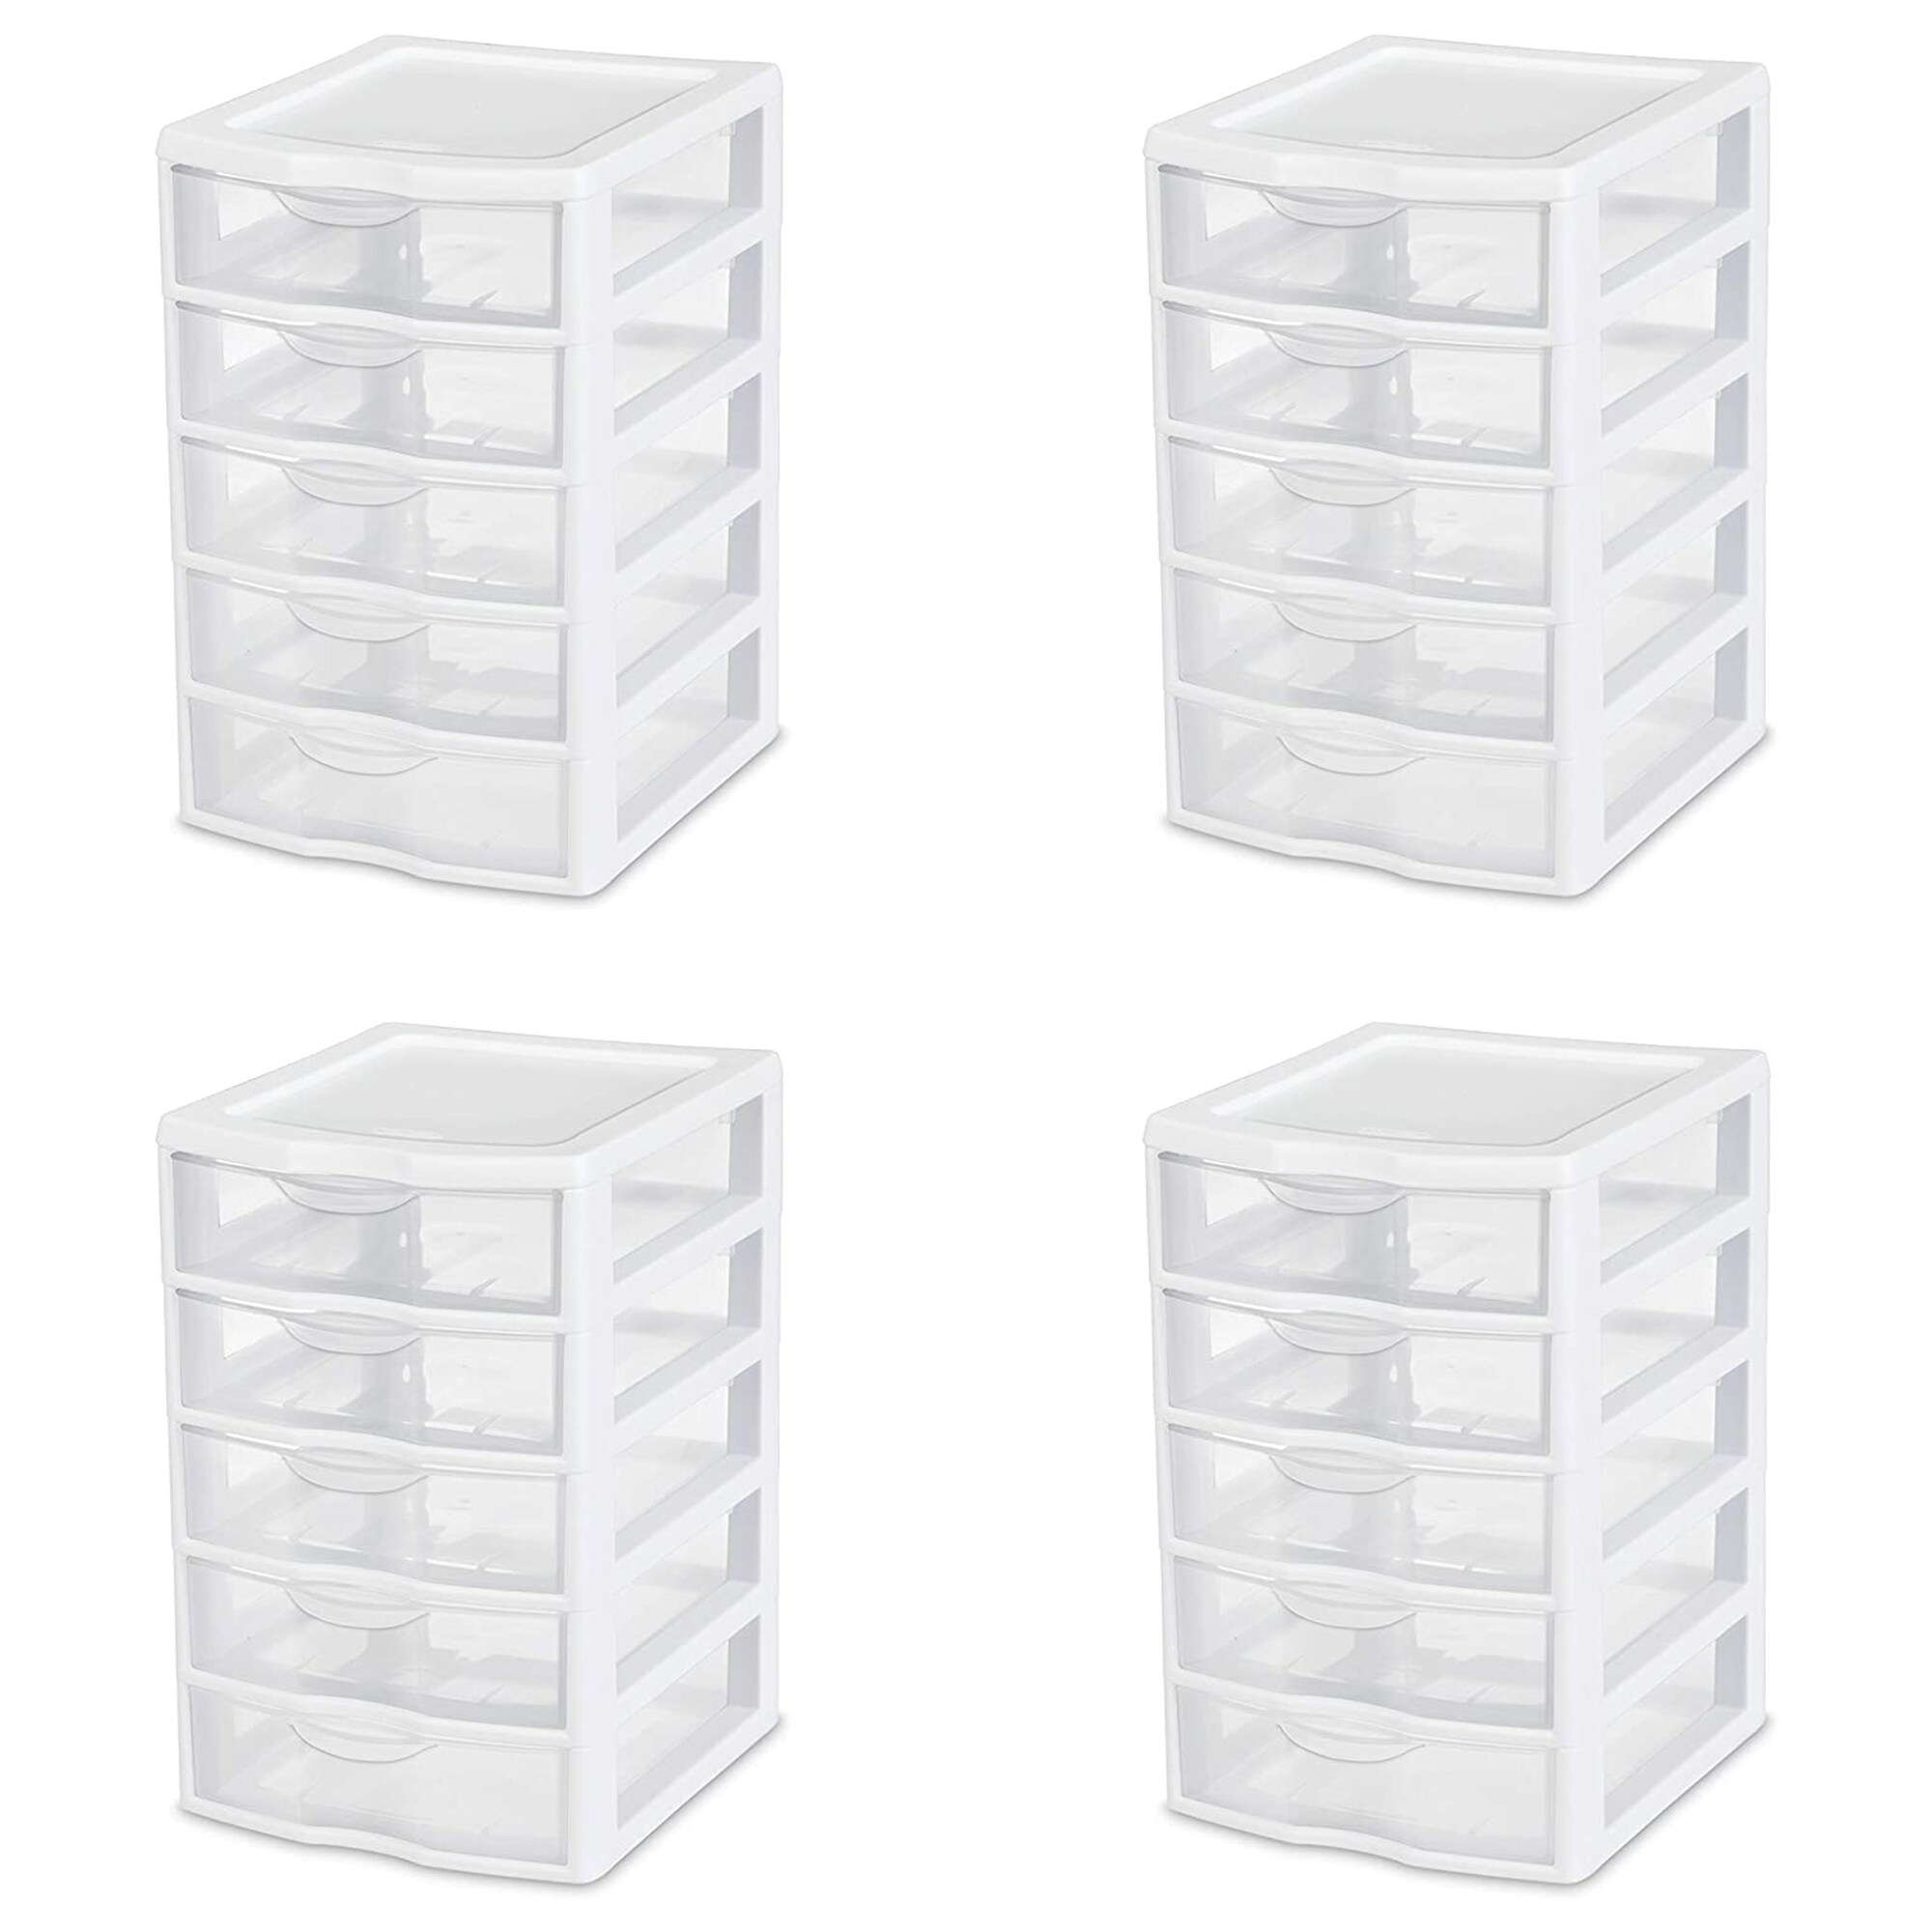 Sterilite Clear Plastic Stackable Small 3 Drawer Storage System for Home  Office, Dorm Room, or Bathrooms, White Frame, (12 Pack)